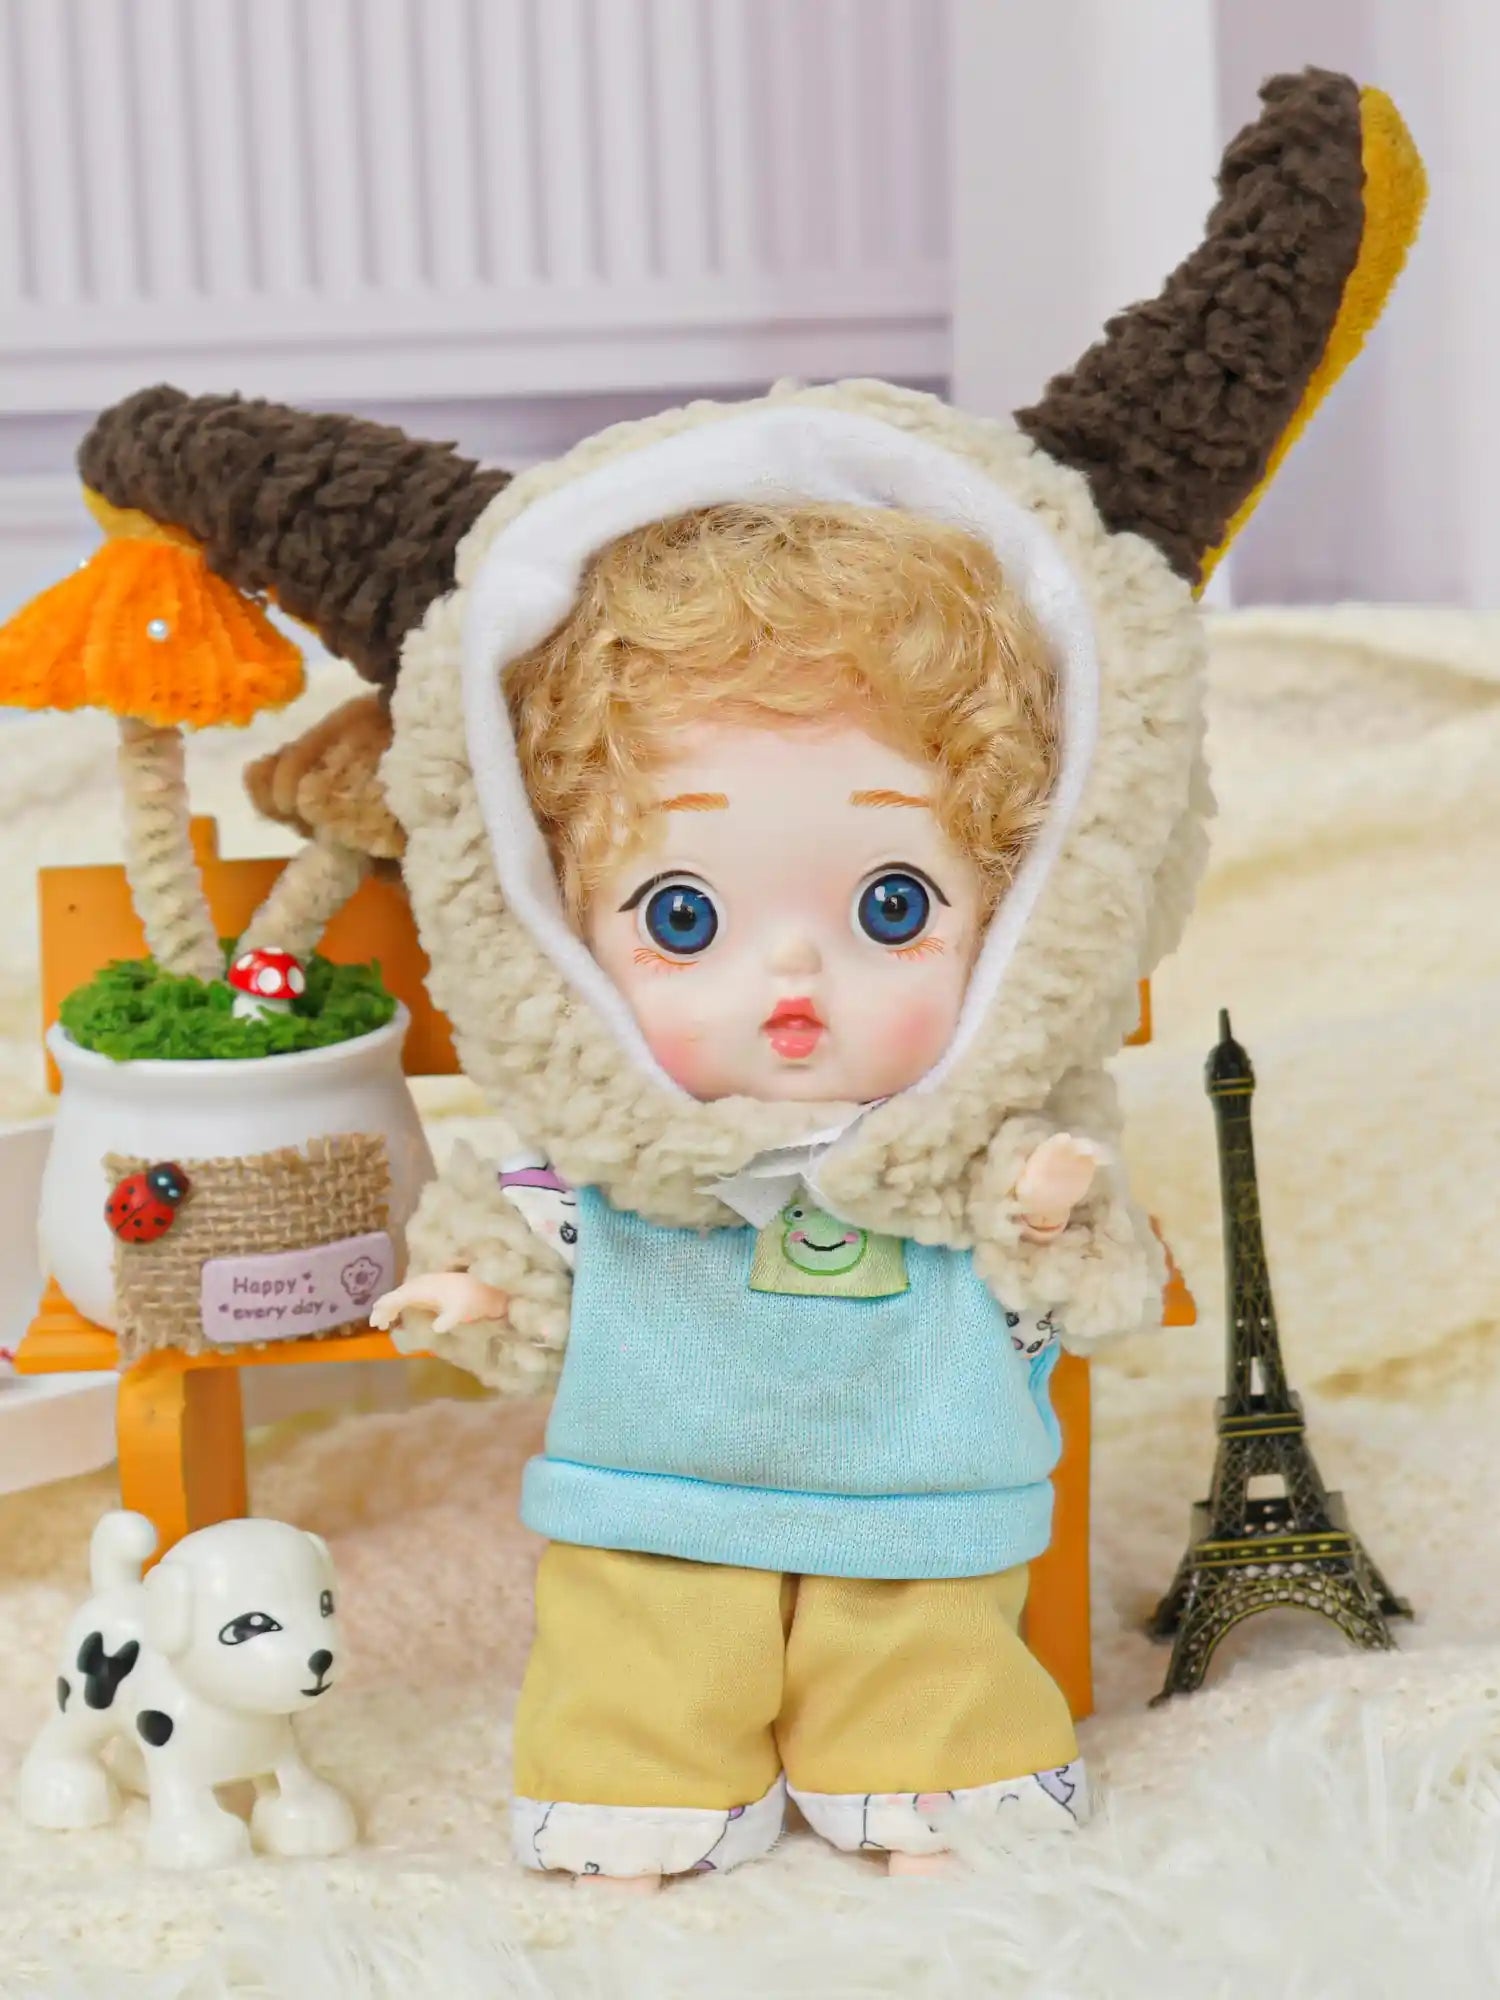 The BJD, complete with a cuddly lamb hood, shares a space with a delightful array of miniatures, including a symbolic Eiffel Tower.